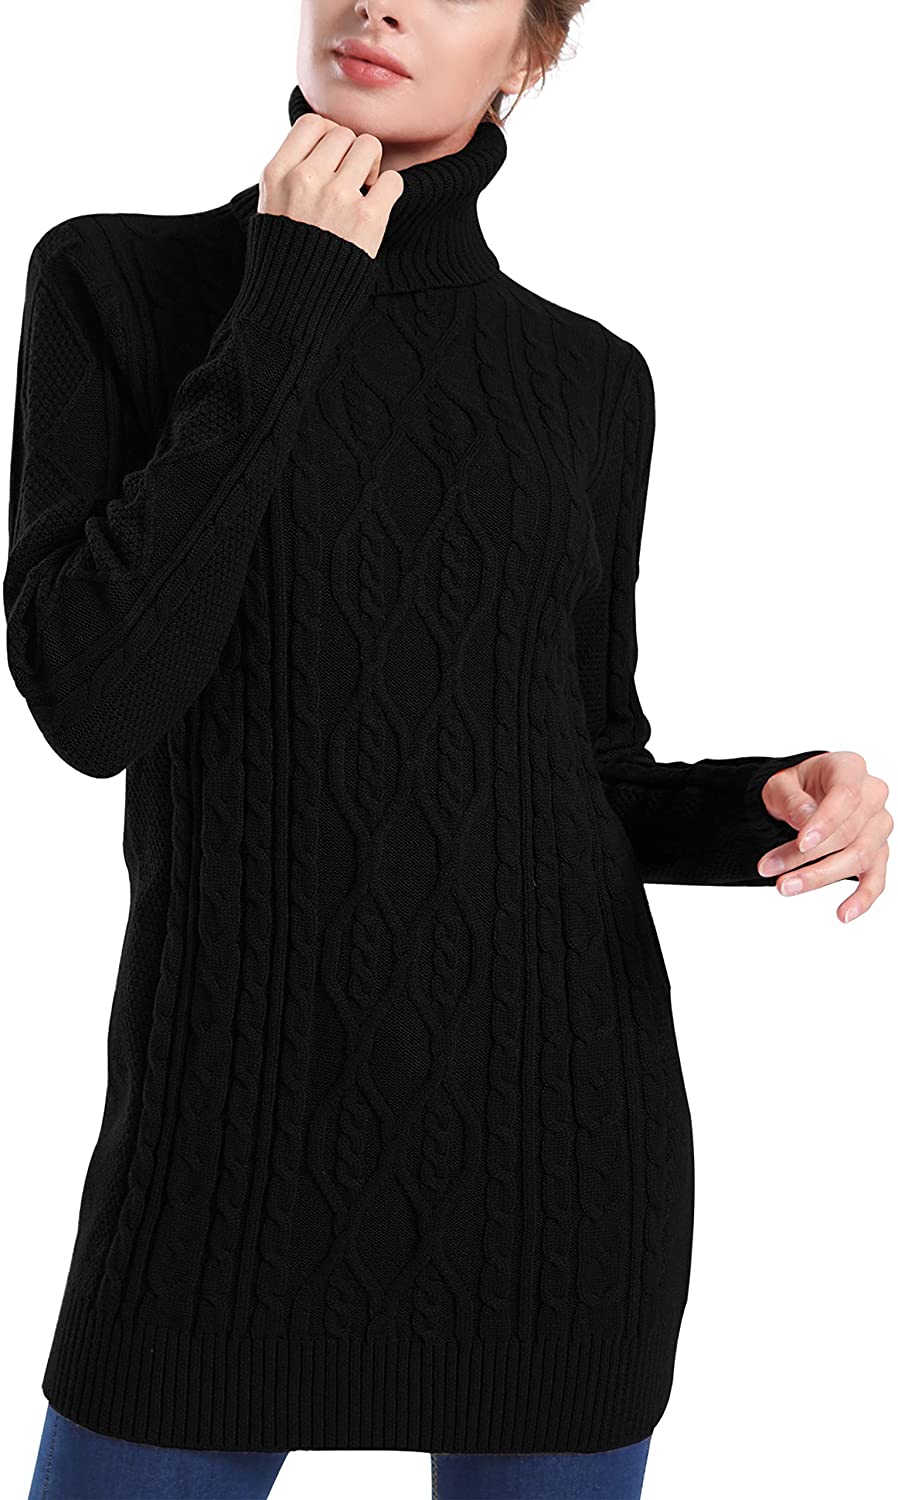 PrettyGuide Women's Long Sweater Turtleneck Cable Knit Tunic Sweater Tops